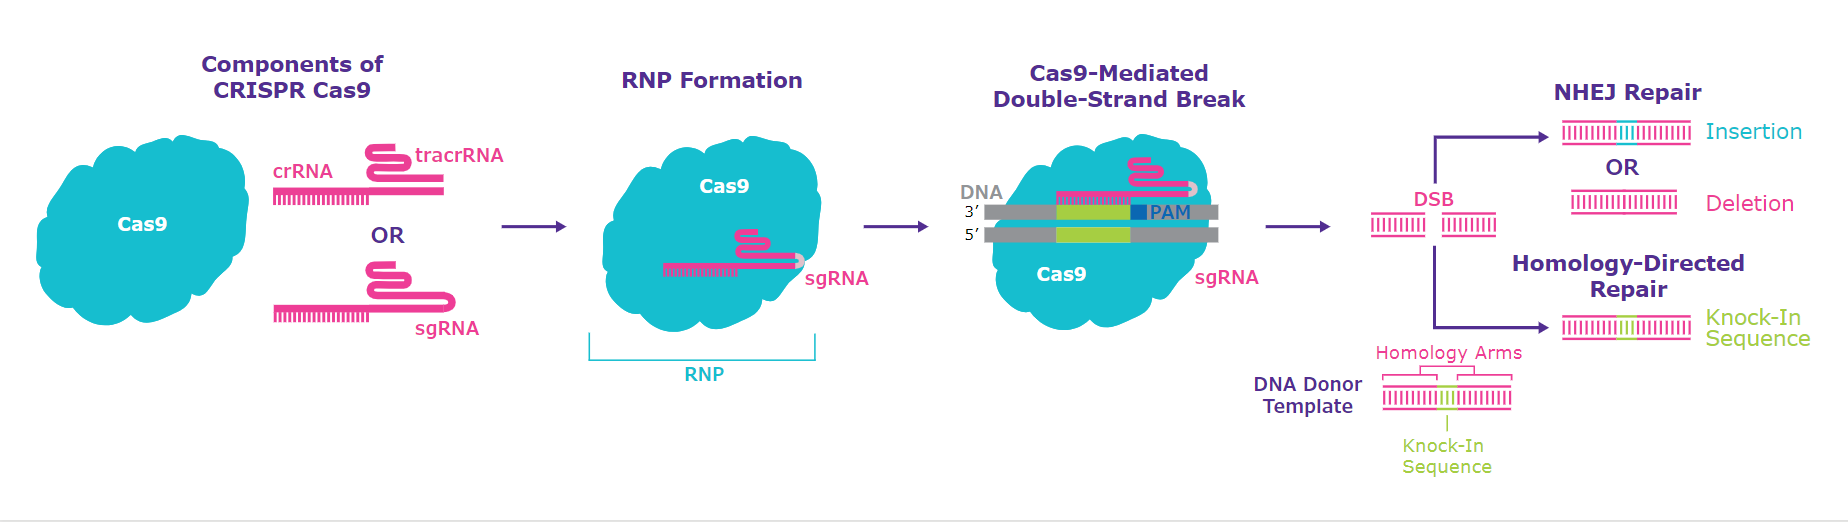 Schematic diagram of the CRISPR one-part and two-part systems with Cas9 protein, demonstrating the composition of the Ribonucleoprotein (RNP). After a double-strand break is created two possible repair pathways are taken by the cellular DNA machinery; Non-Homologous End Joining (NHEJ), Indel formation or Homology-Directed Repair (HDR) for targeted insertions or knock-ins.